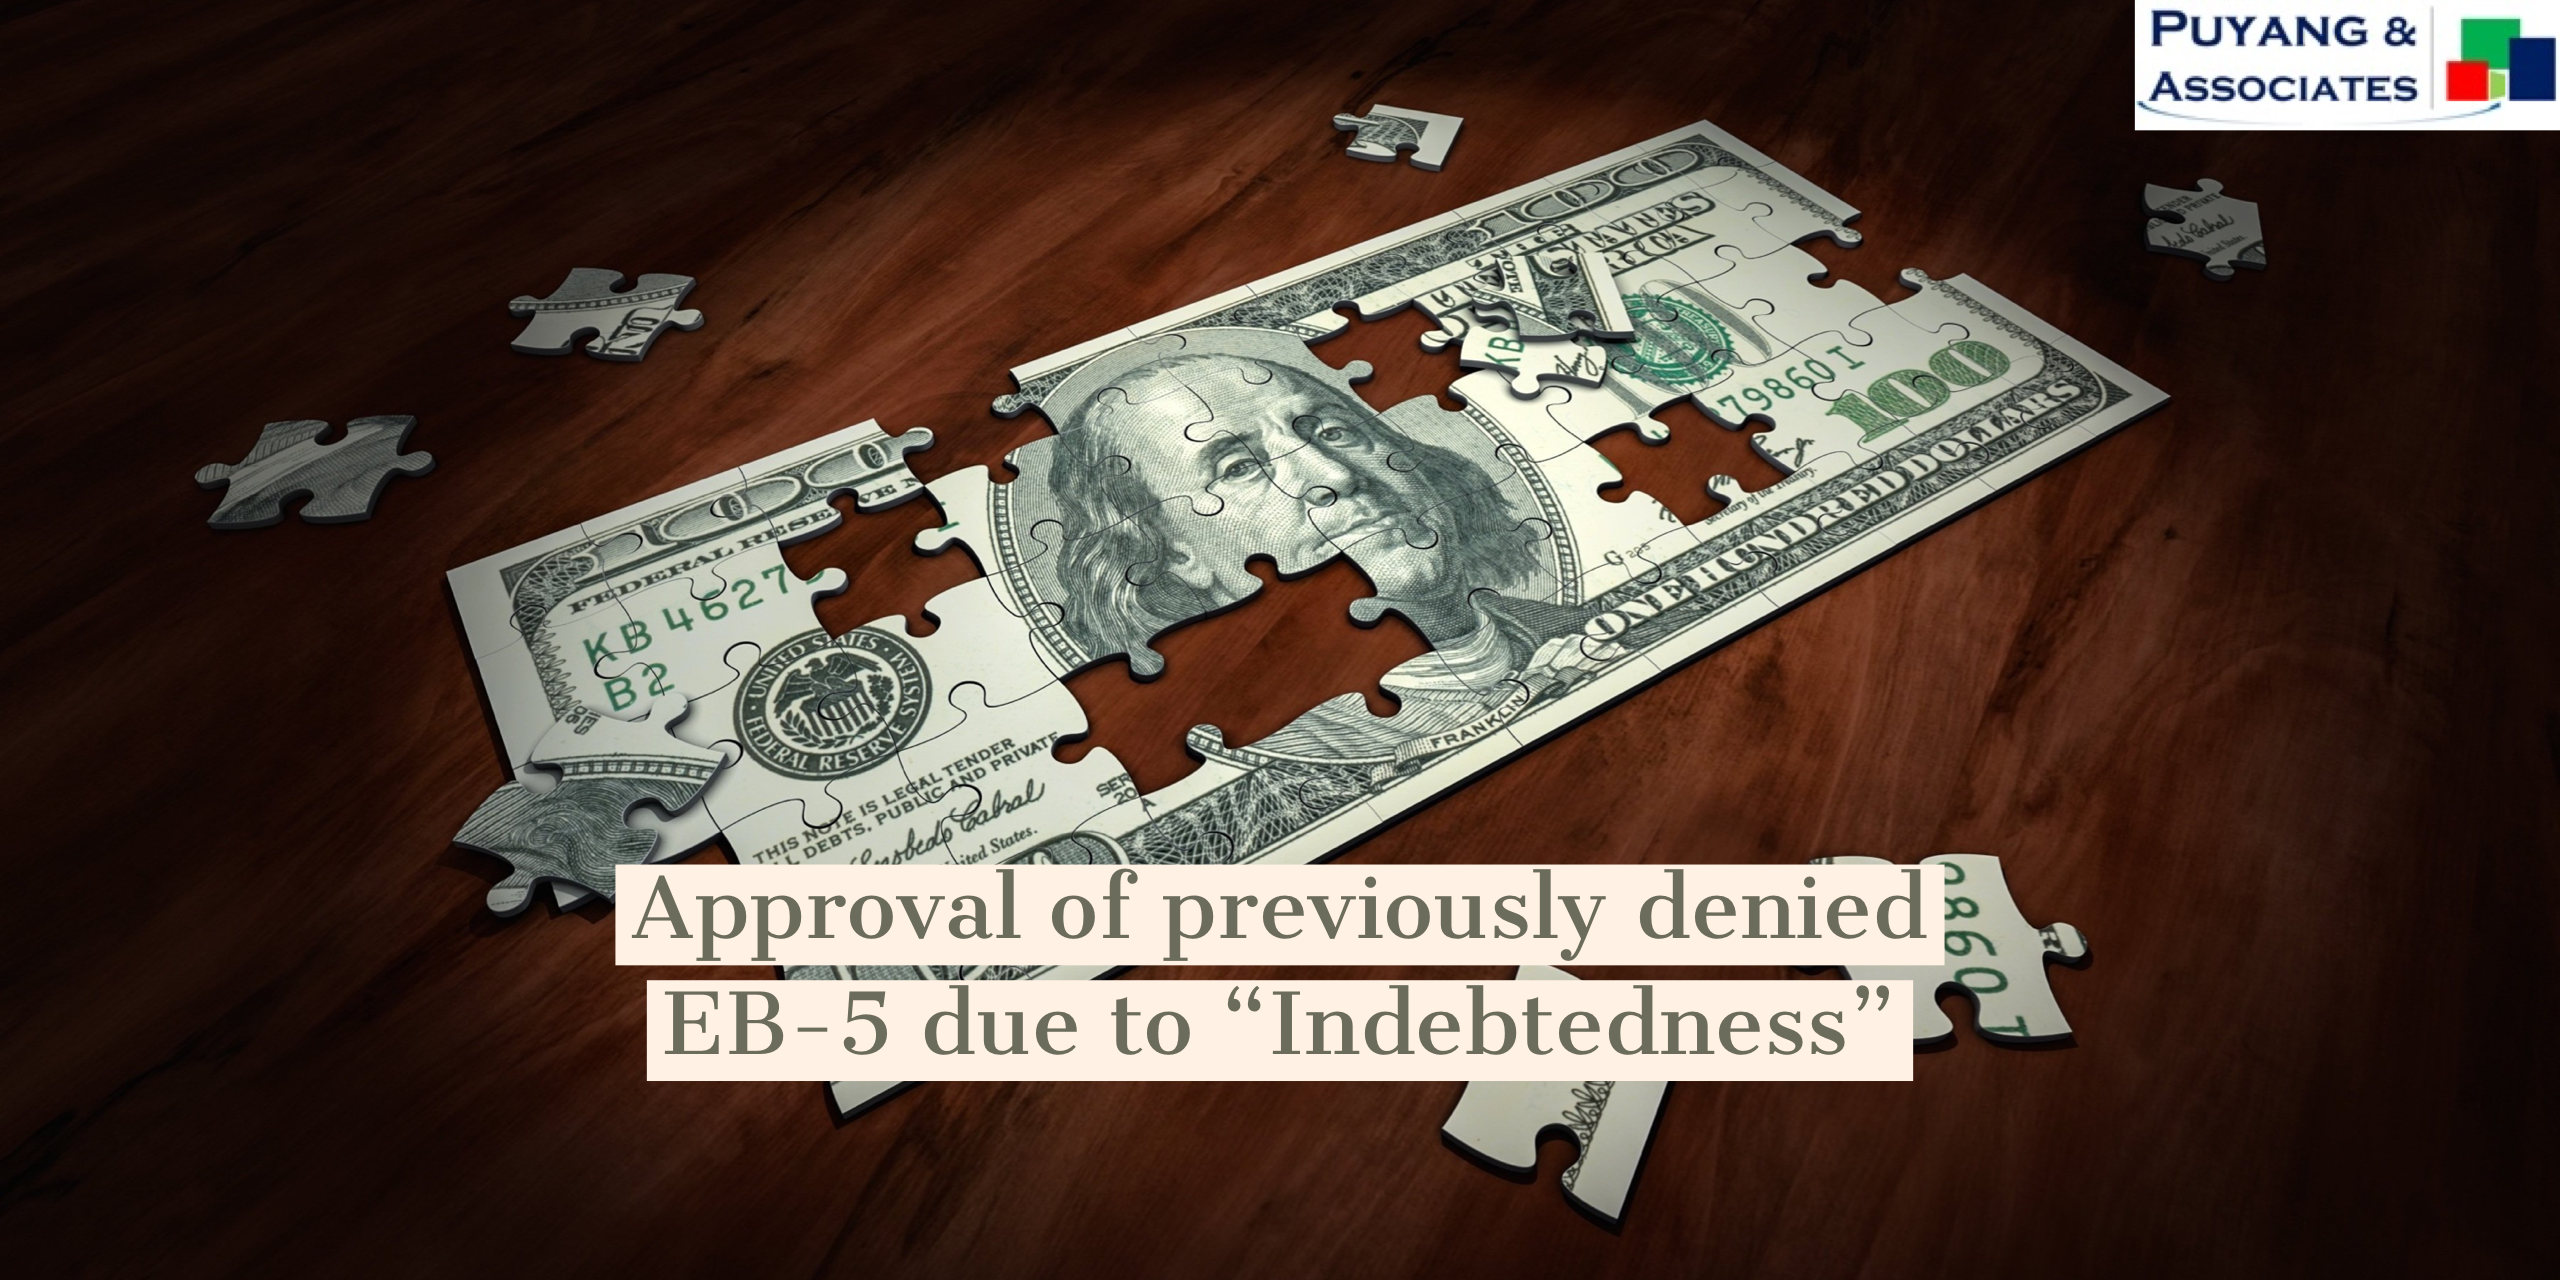 Approval of Previously Denied EB-5 due to “Indebtedness”